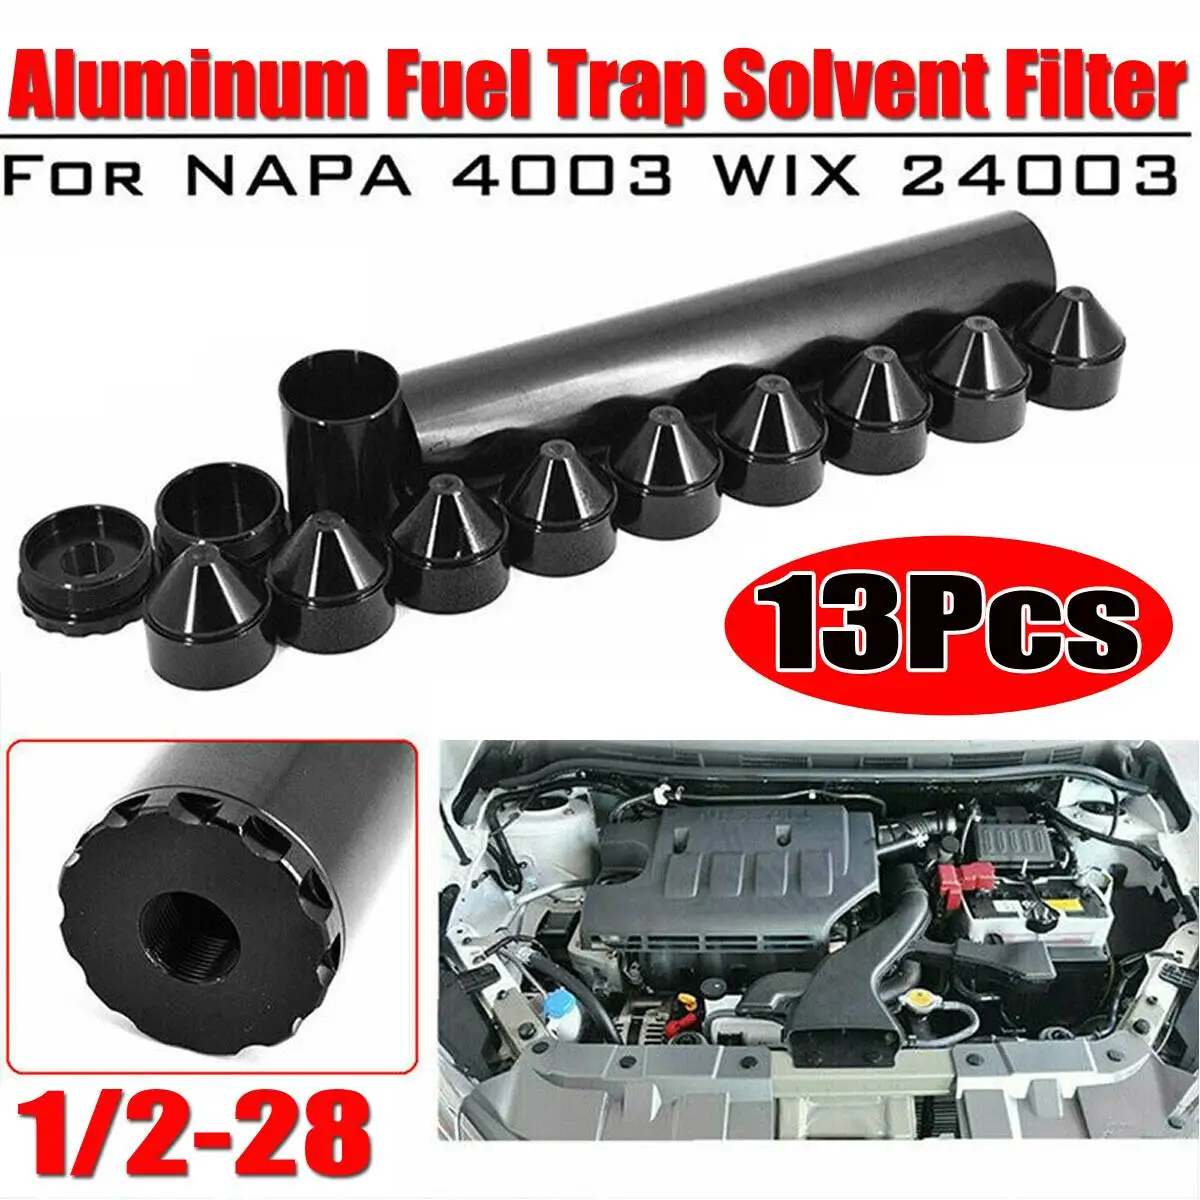 

New 1-3/4x10 For Napa-4003-WIX-24003 Car Fuel Filter For Napa 4003/ WIX 24003 1/2"-28/5/8"-24 Threads Black Aluminum